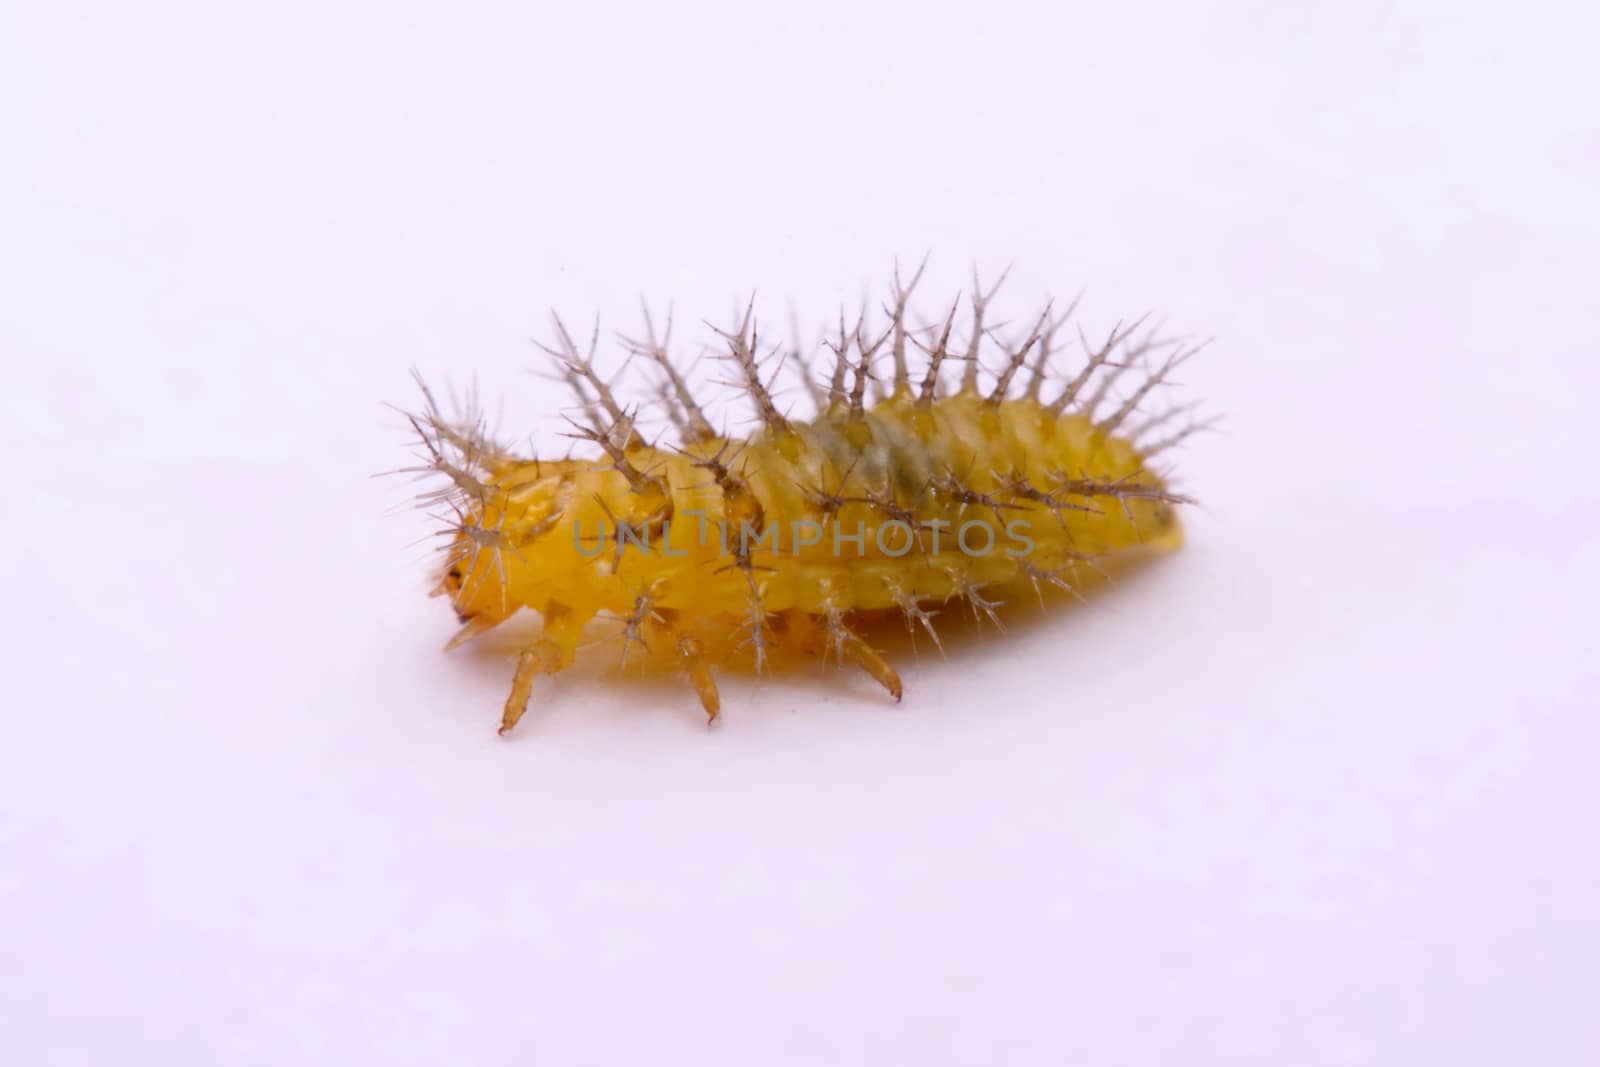 Macro image of a spiny caterpillar white background.